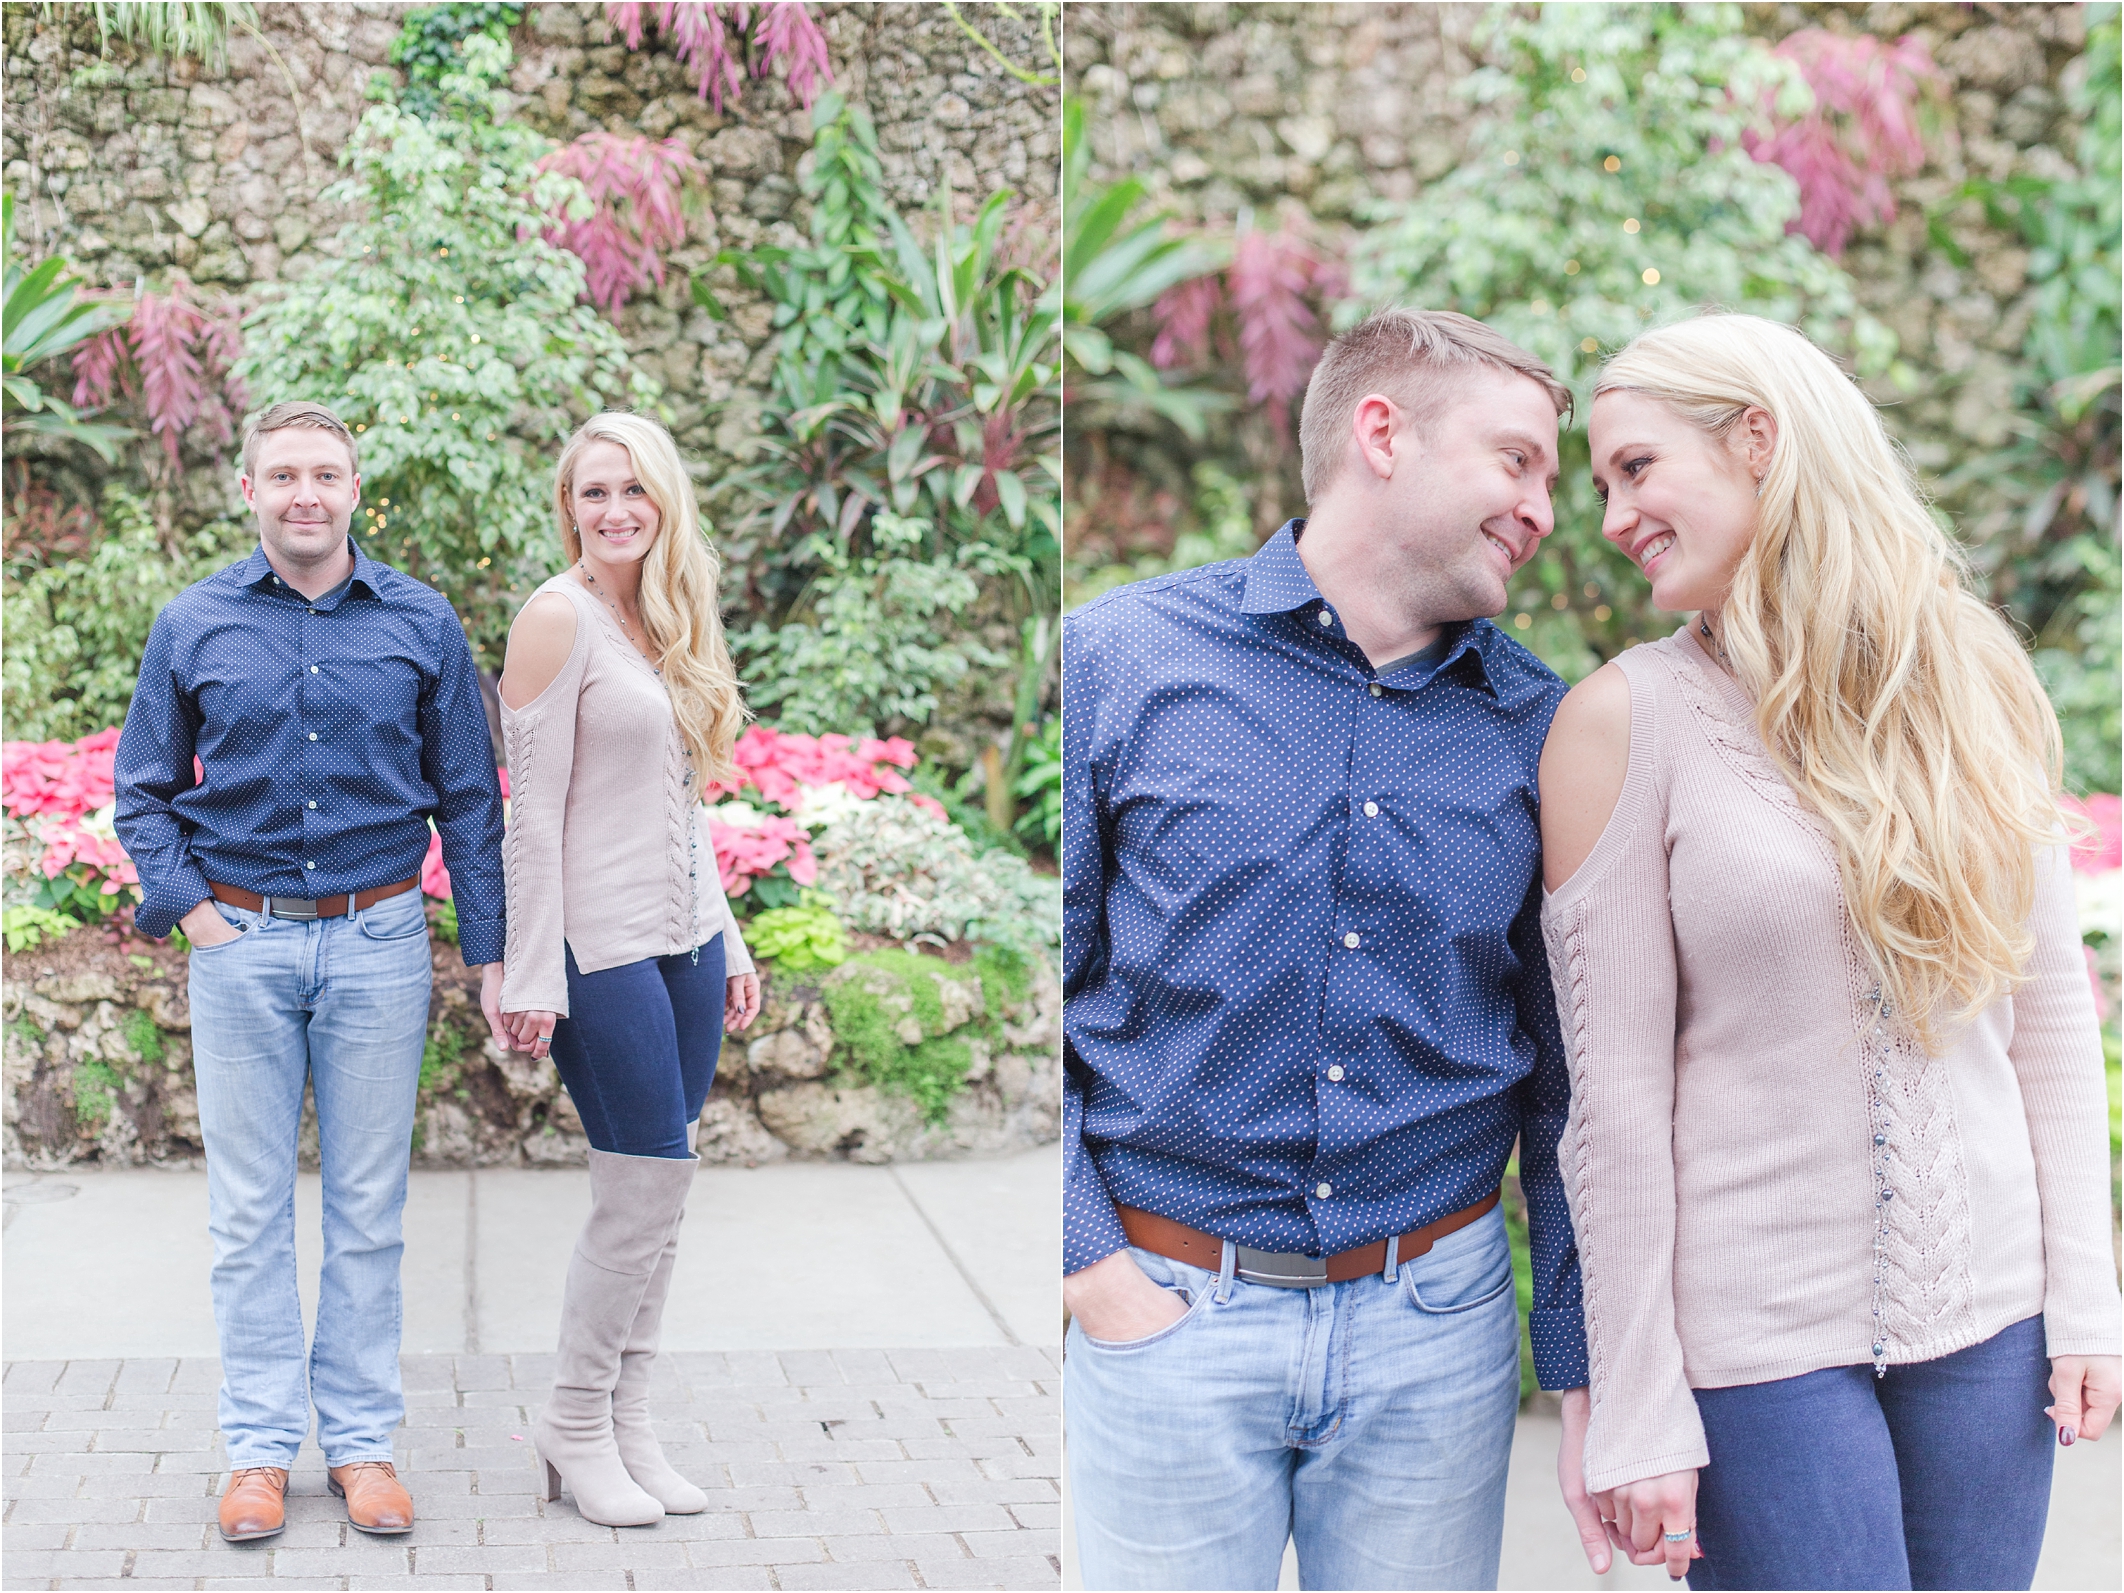 elegant-classic-belle-isle-conservatory-engagement-photos-in-detroit-mi-by-courtney-carolyn-photography_0031.jpg